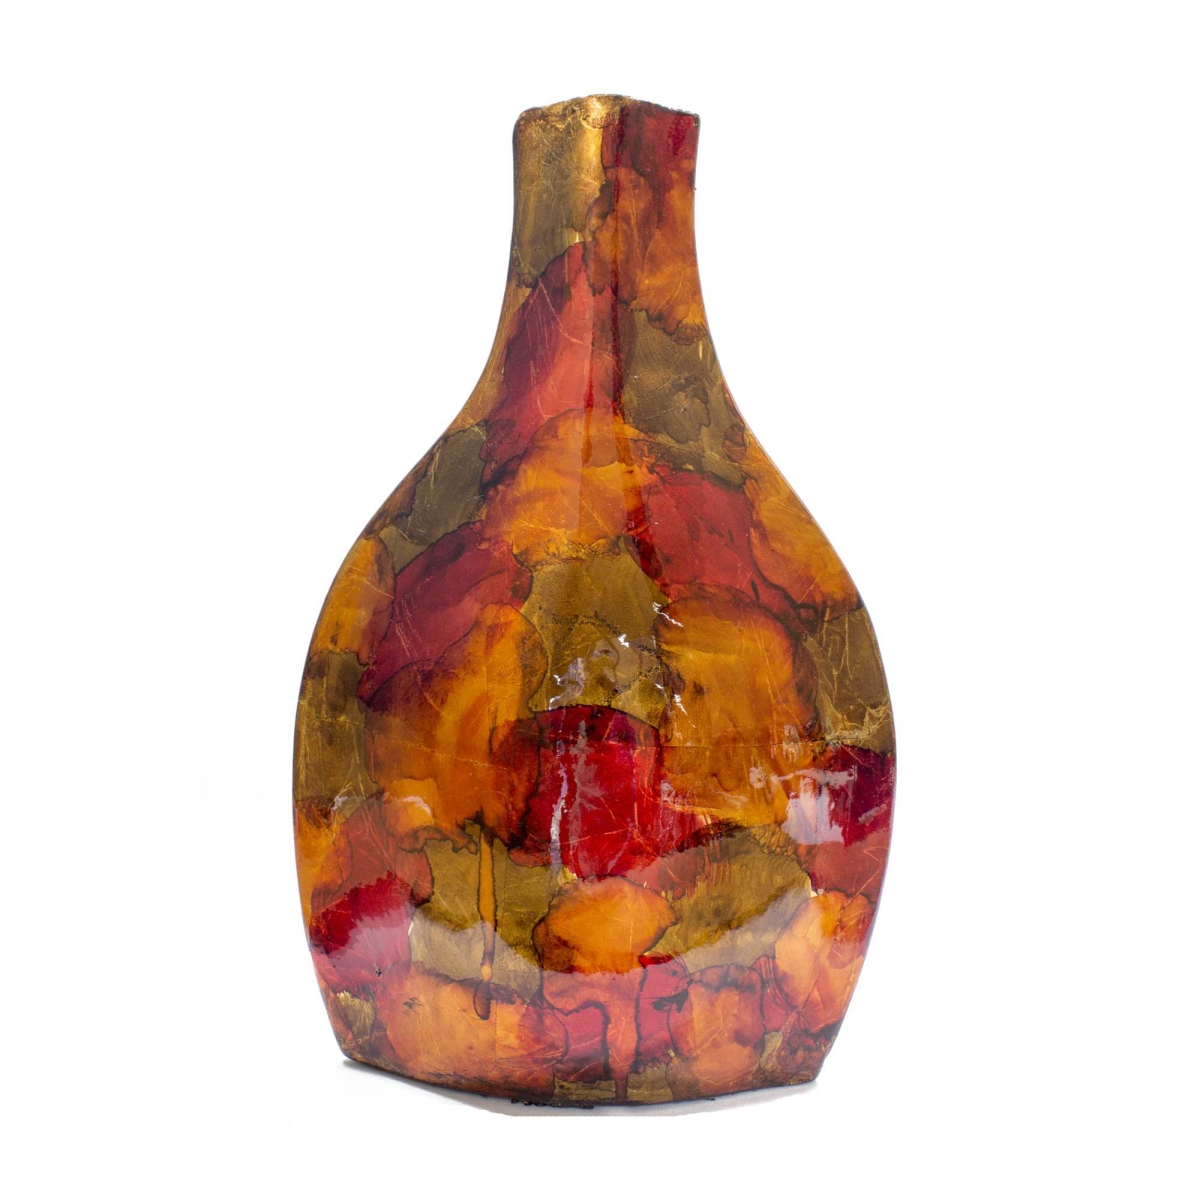 Home Roots Beddings 328611 Ceramic Table Vase, Gold, Copper & Brown - 16 In.